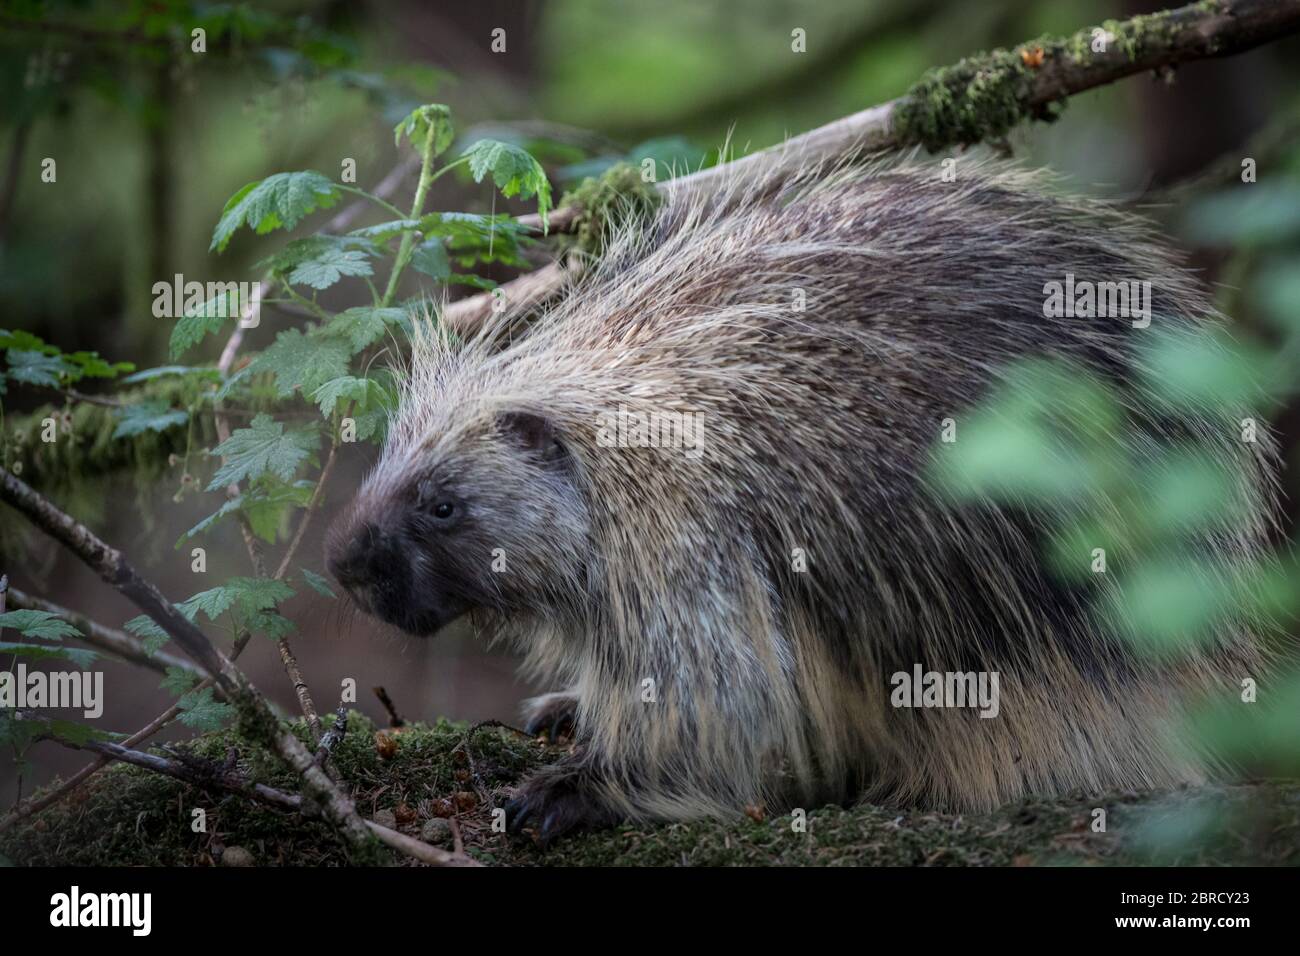 Glacier Bay National Park, Southeast Alaska, USA is home to scenic forest views and wildlife like North American porcupine, Erethizon dorsatum. Stock Photo